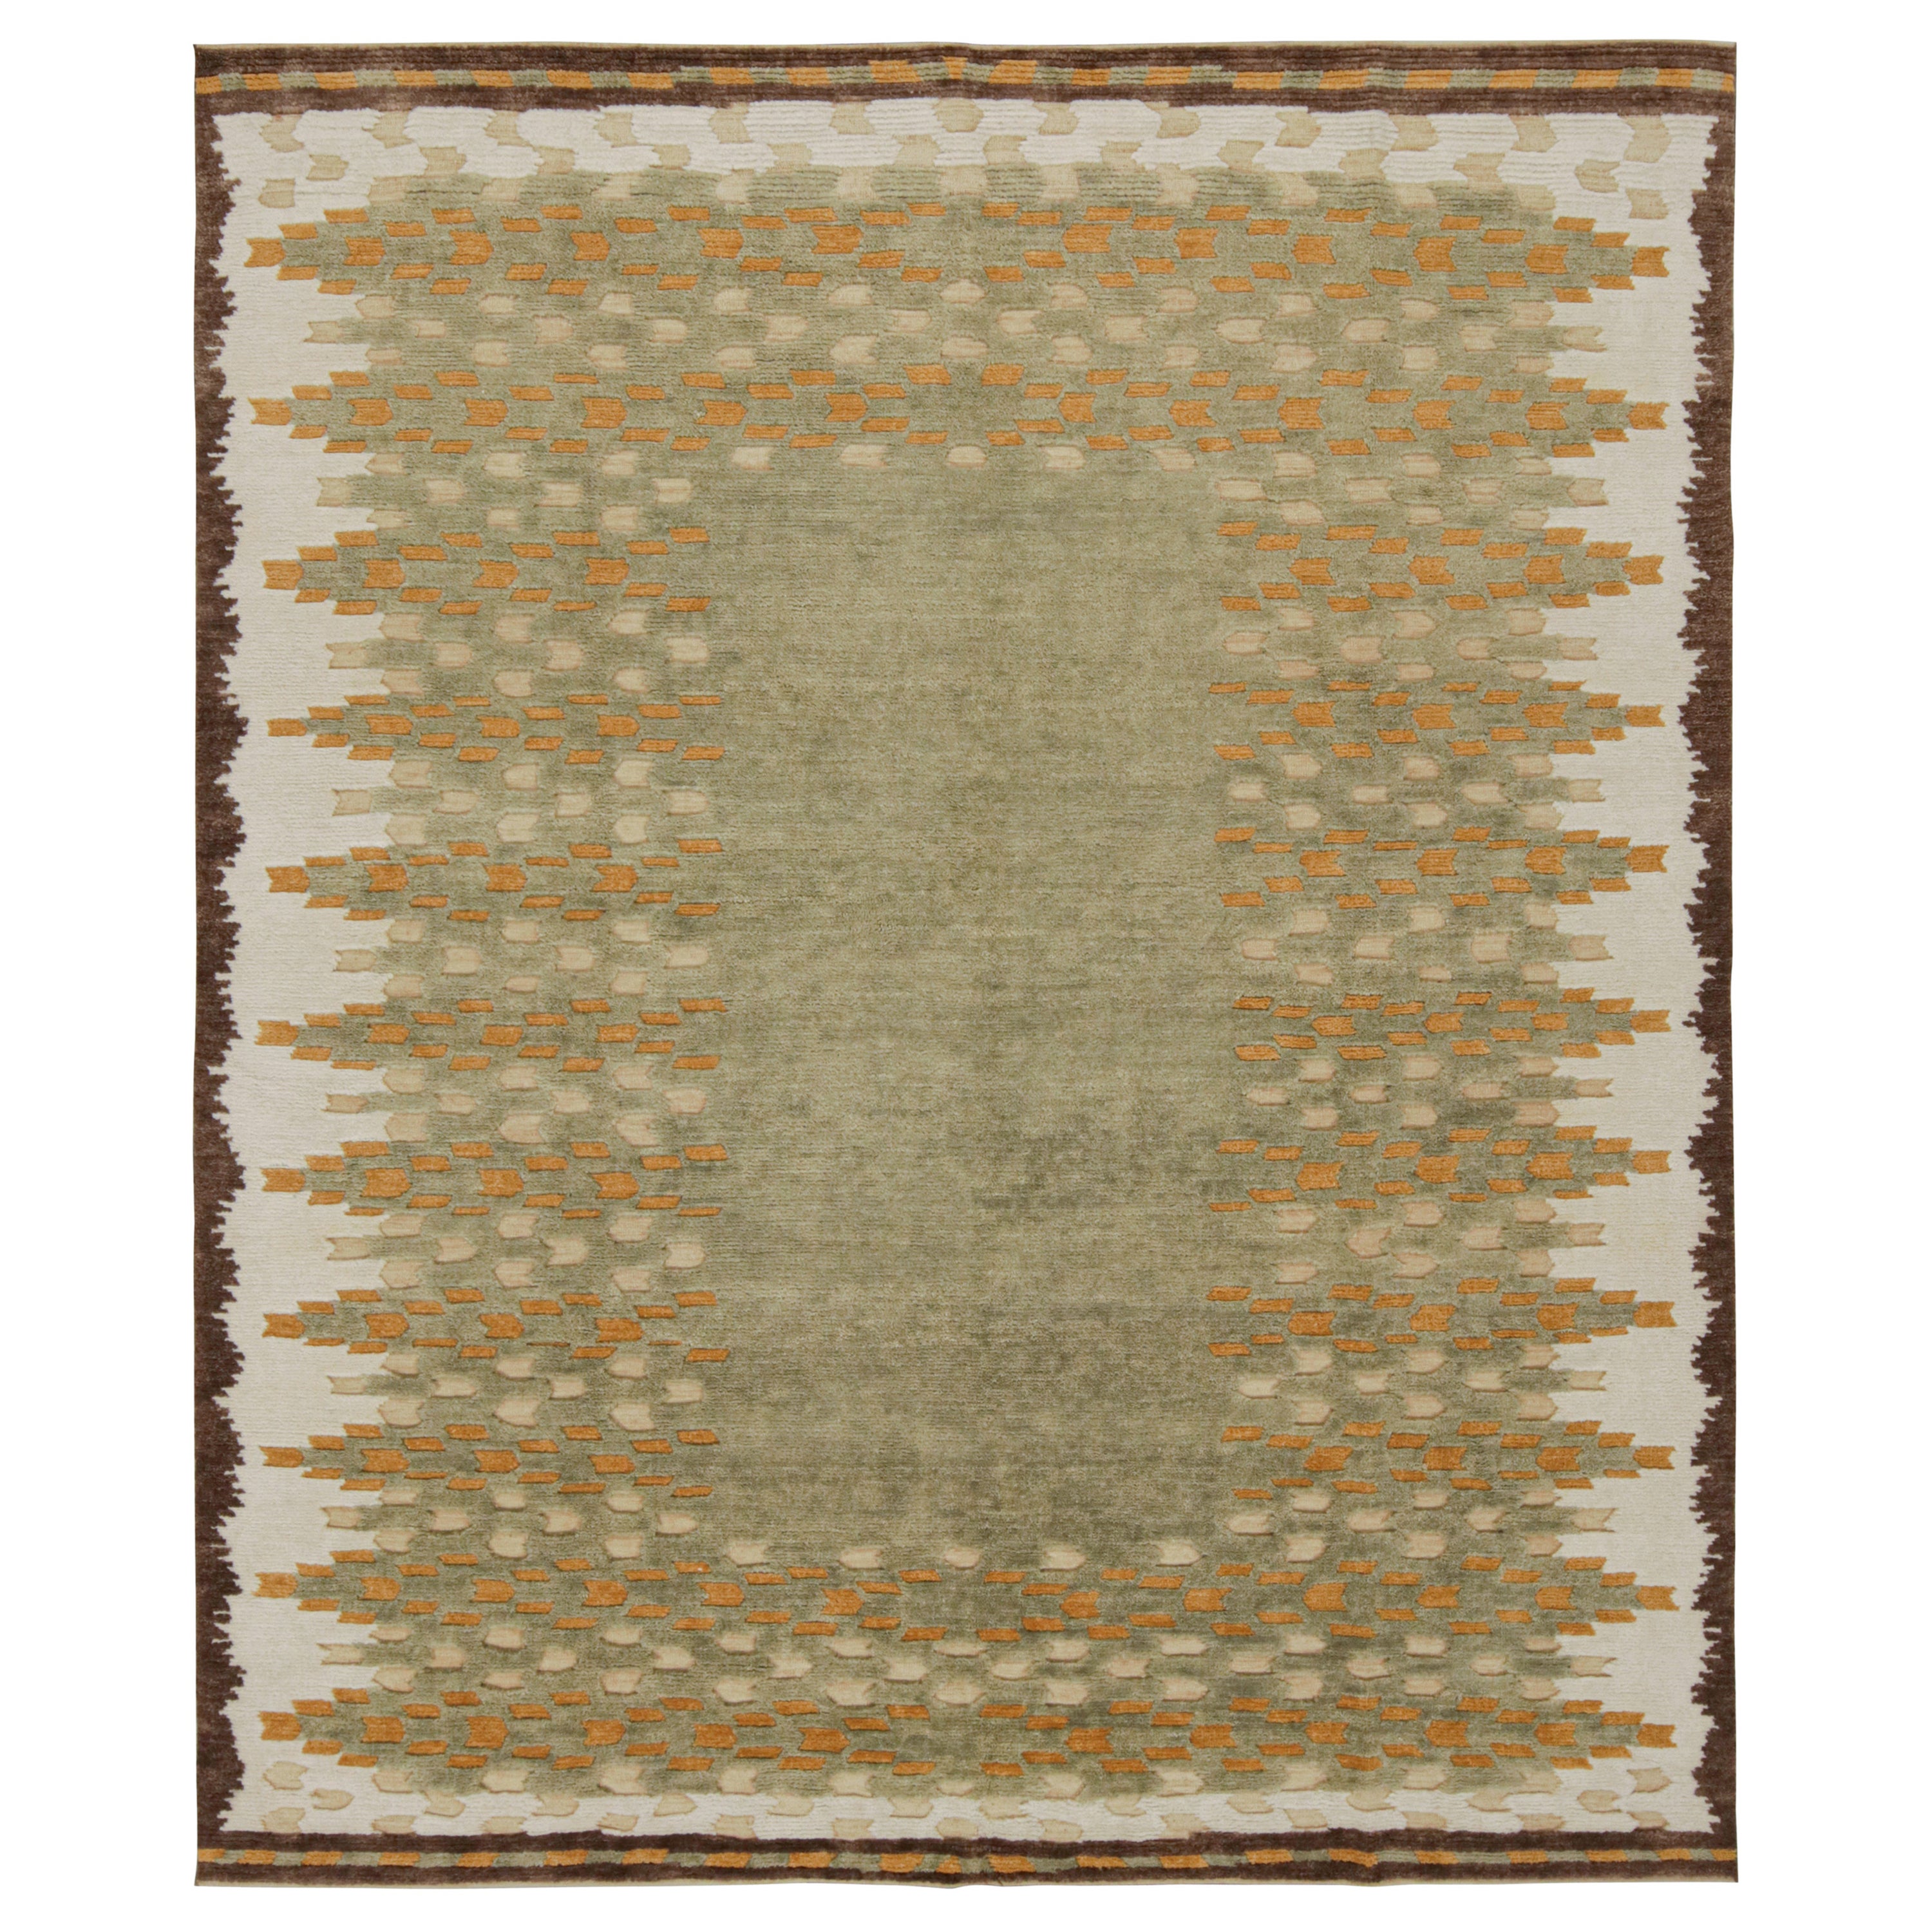 Rug & Kilim’s Scandinavian Style Rug in Green with Geometric Patterns